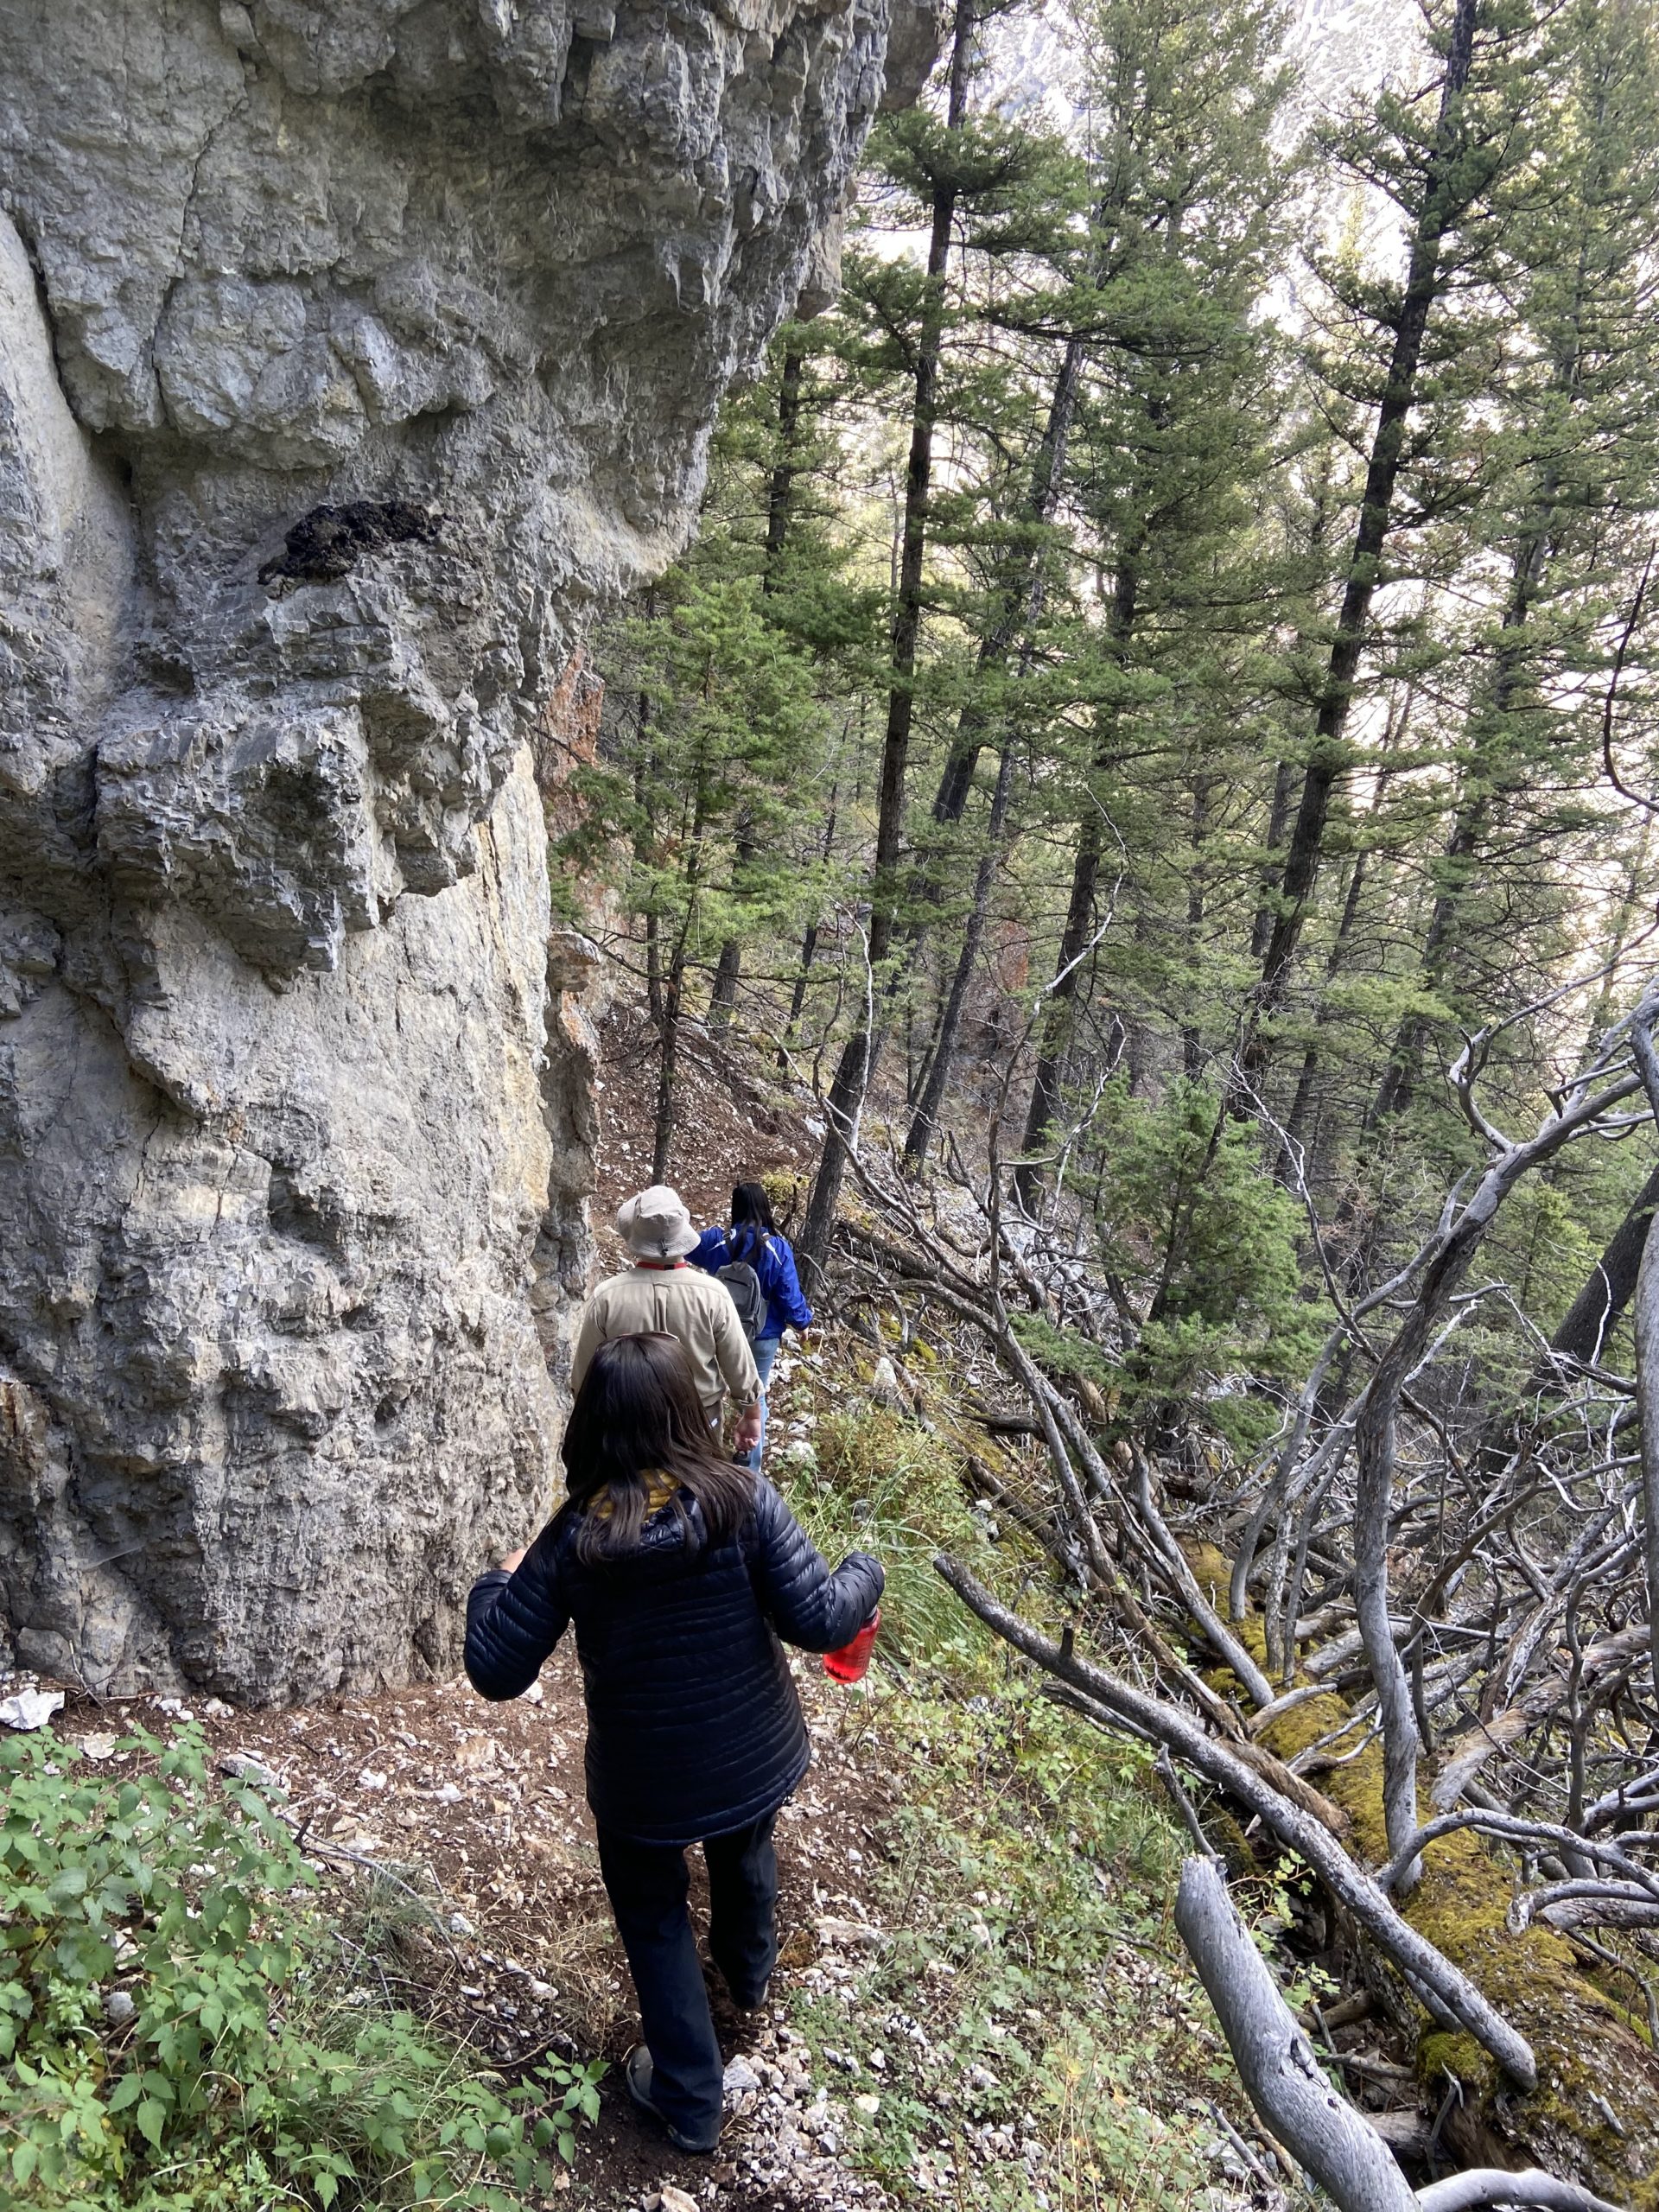 Members of WPEF board member Danielle Ulrich's lab hiking down after seeing the wickiup on the third stop of the Friday field trip